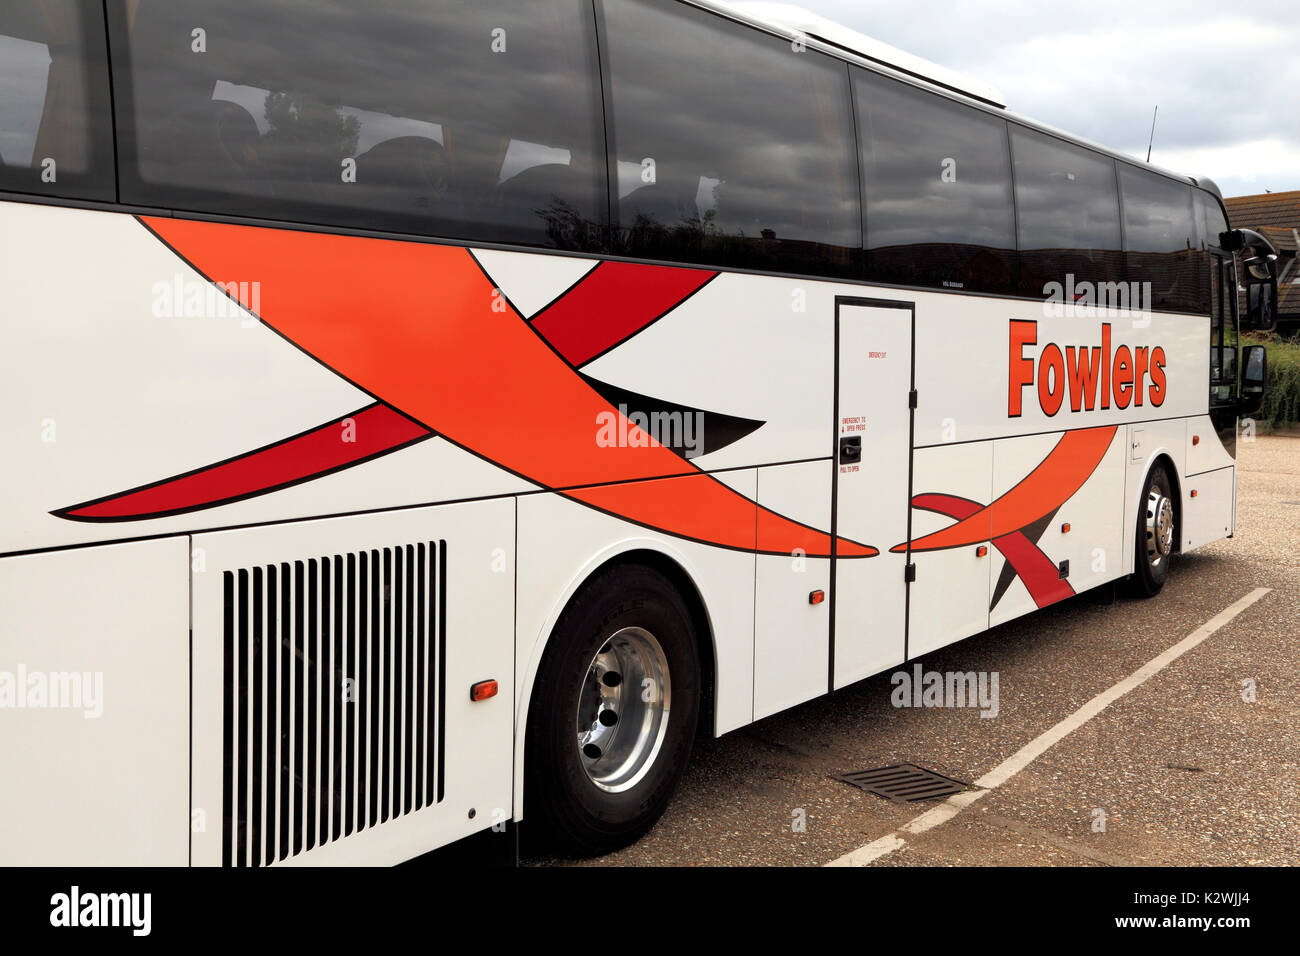 Fowlers Travel, Coach, coaches, day trips, trip, excursion, excursions, travel company, transport, companies, England, UK Stock Photo